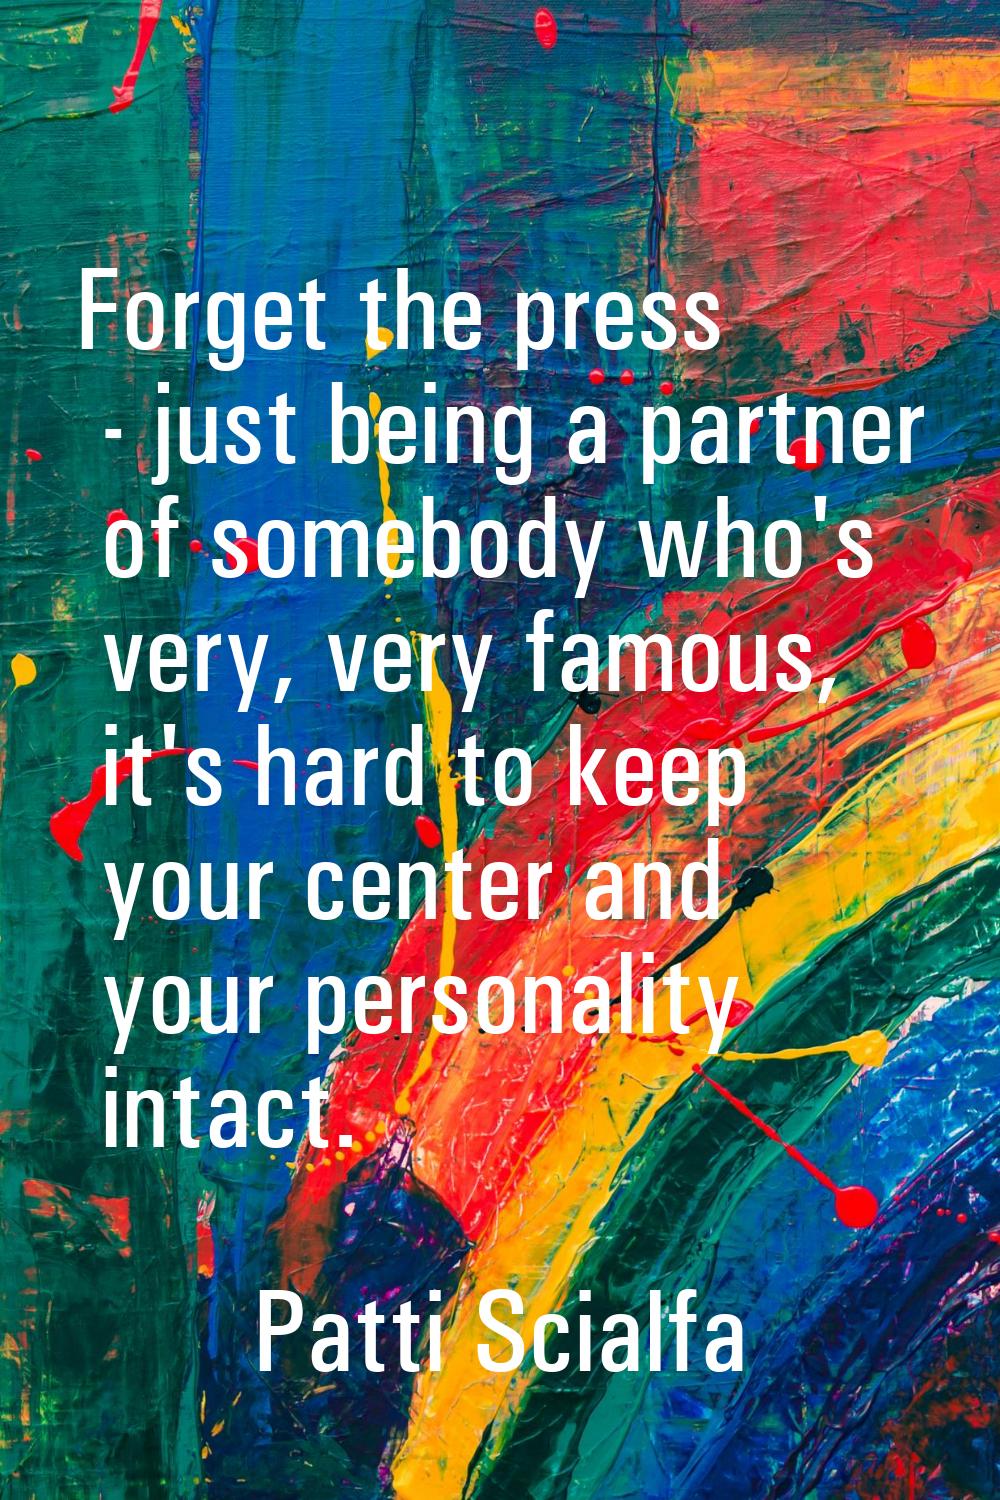 Forget the press - just being a partner of somebody who's very, very famous, it's hard to keep your